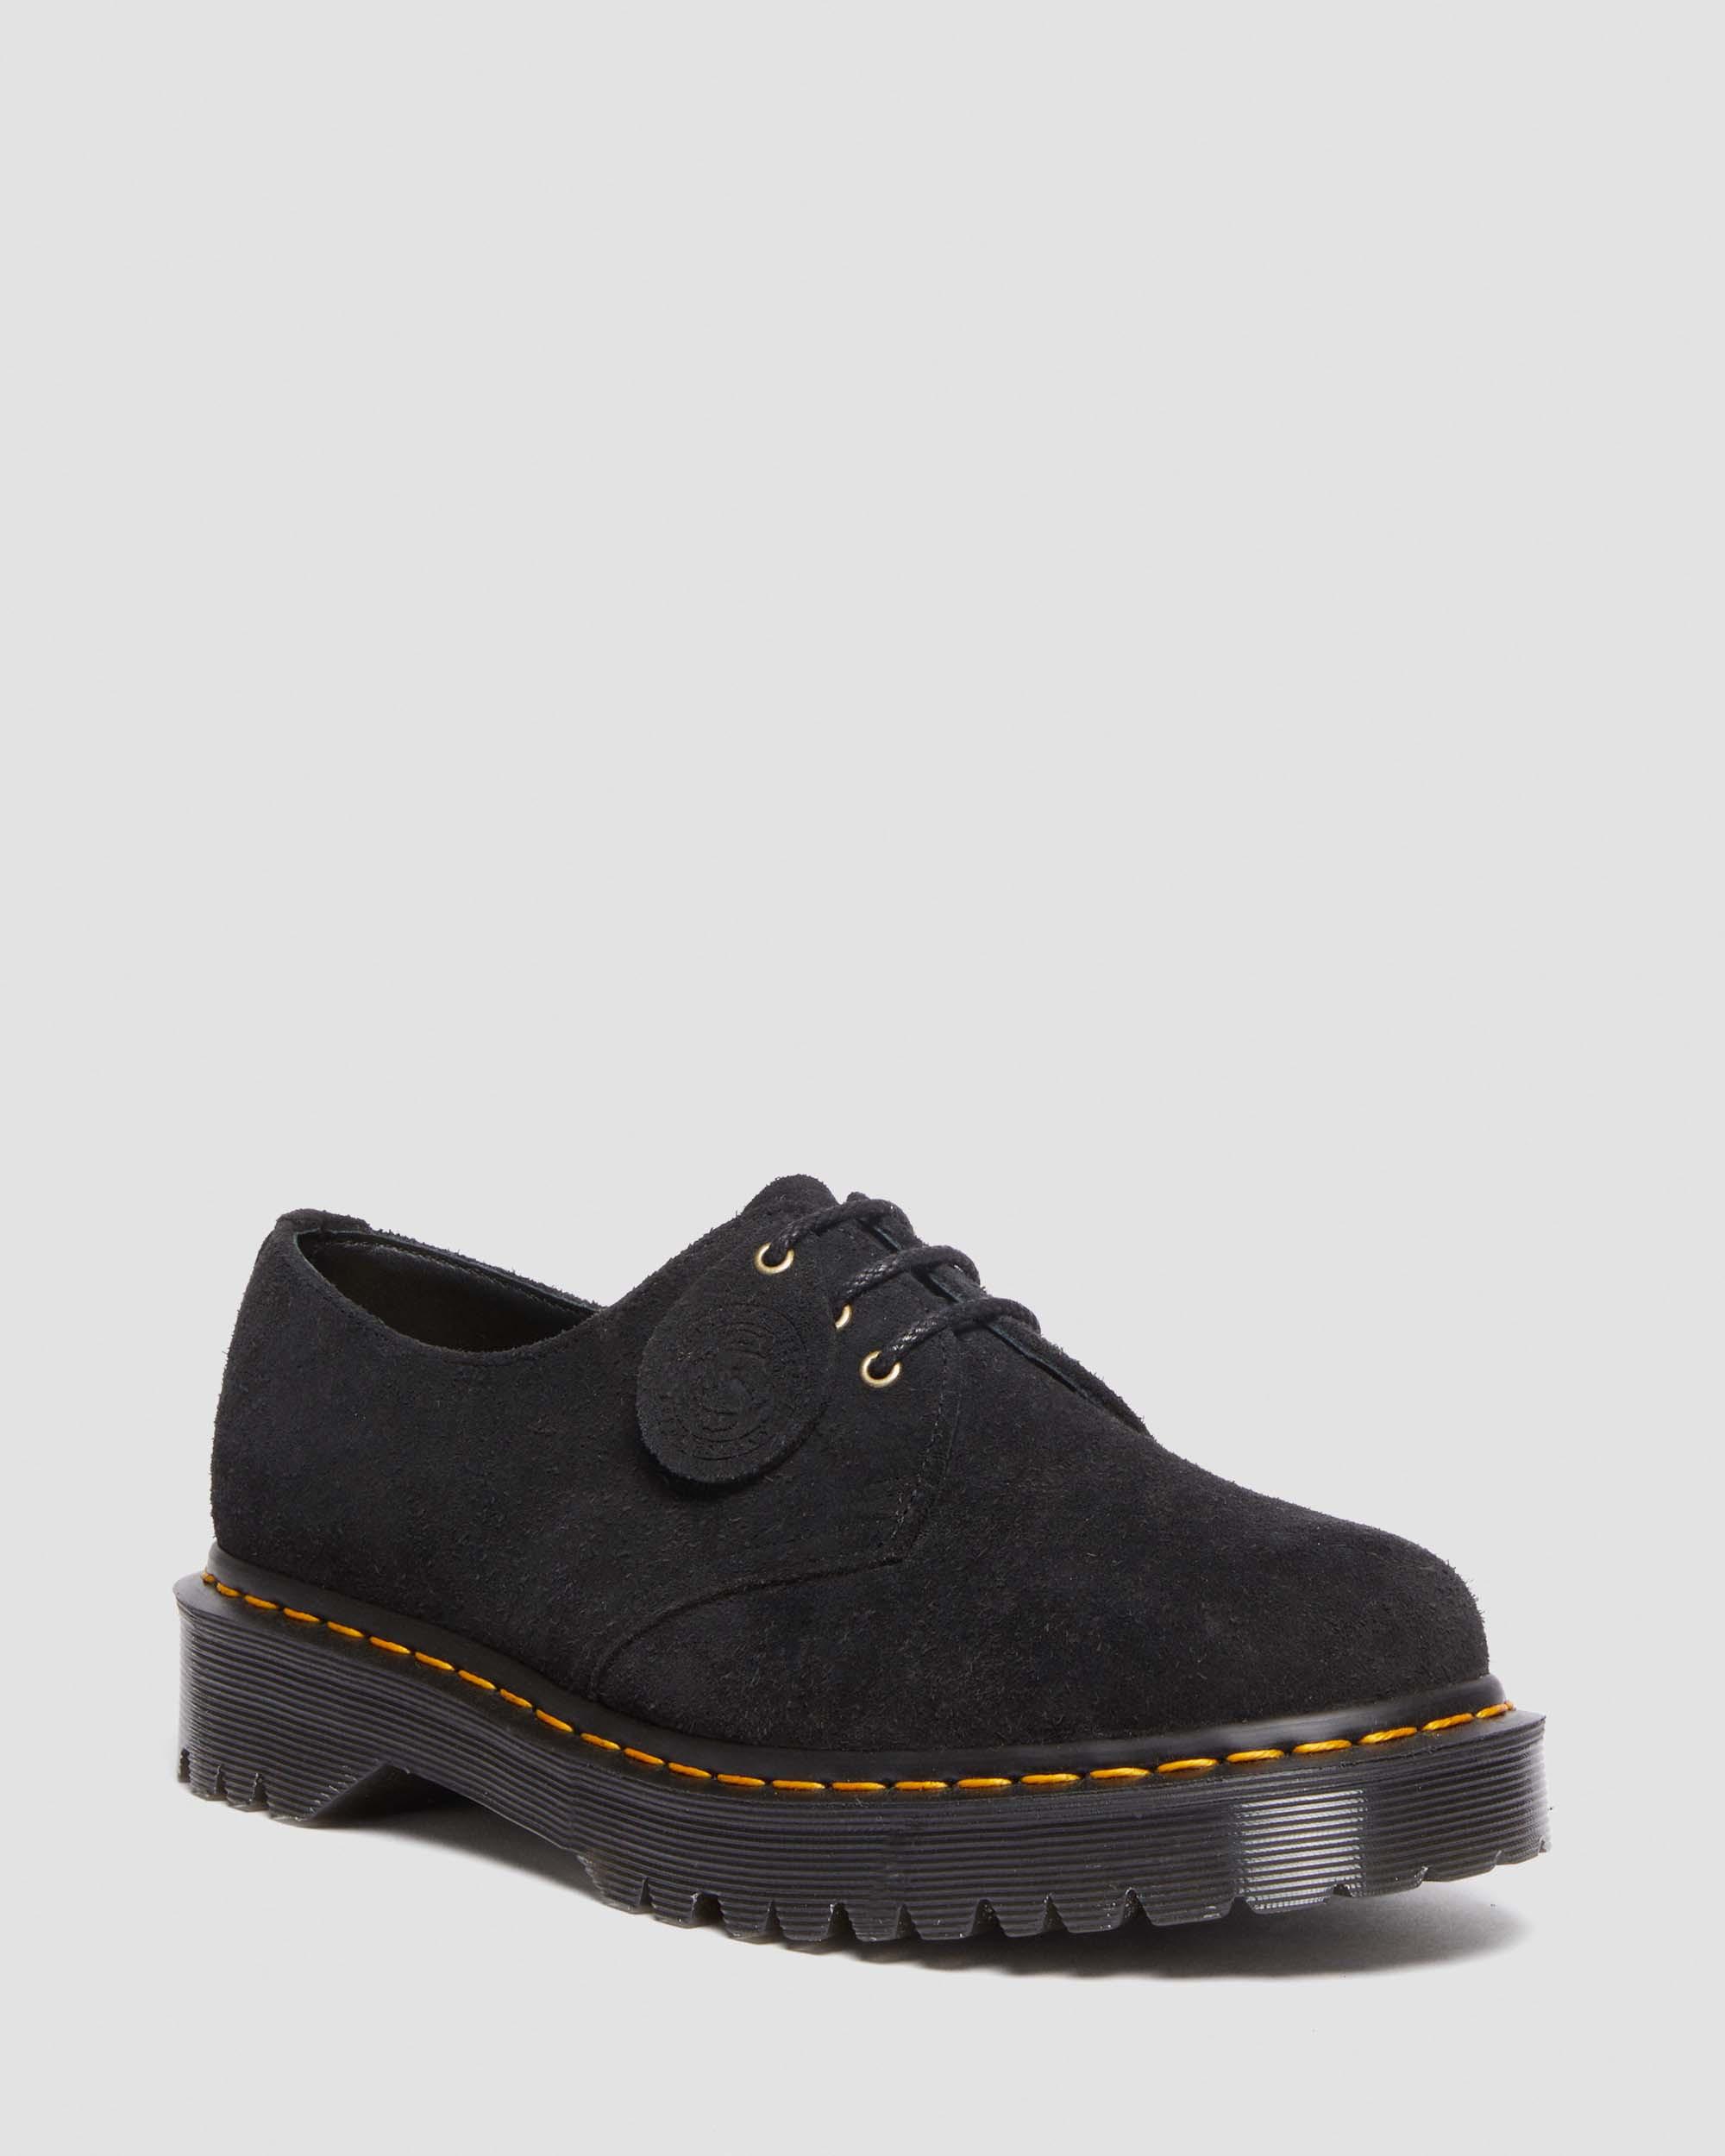 1461 Bex Made In England Tufted Suede Shoes in Black | Dr. Martens